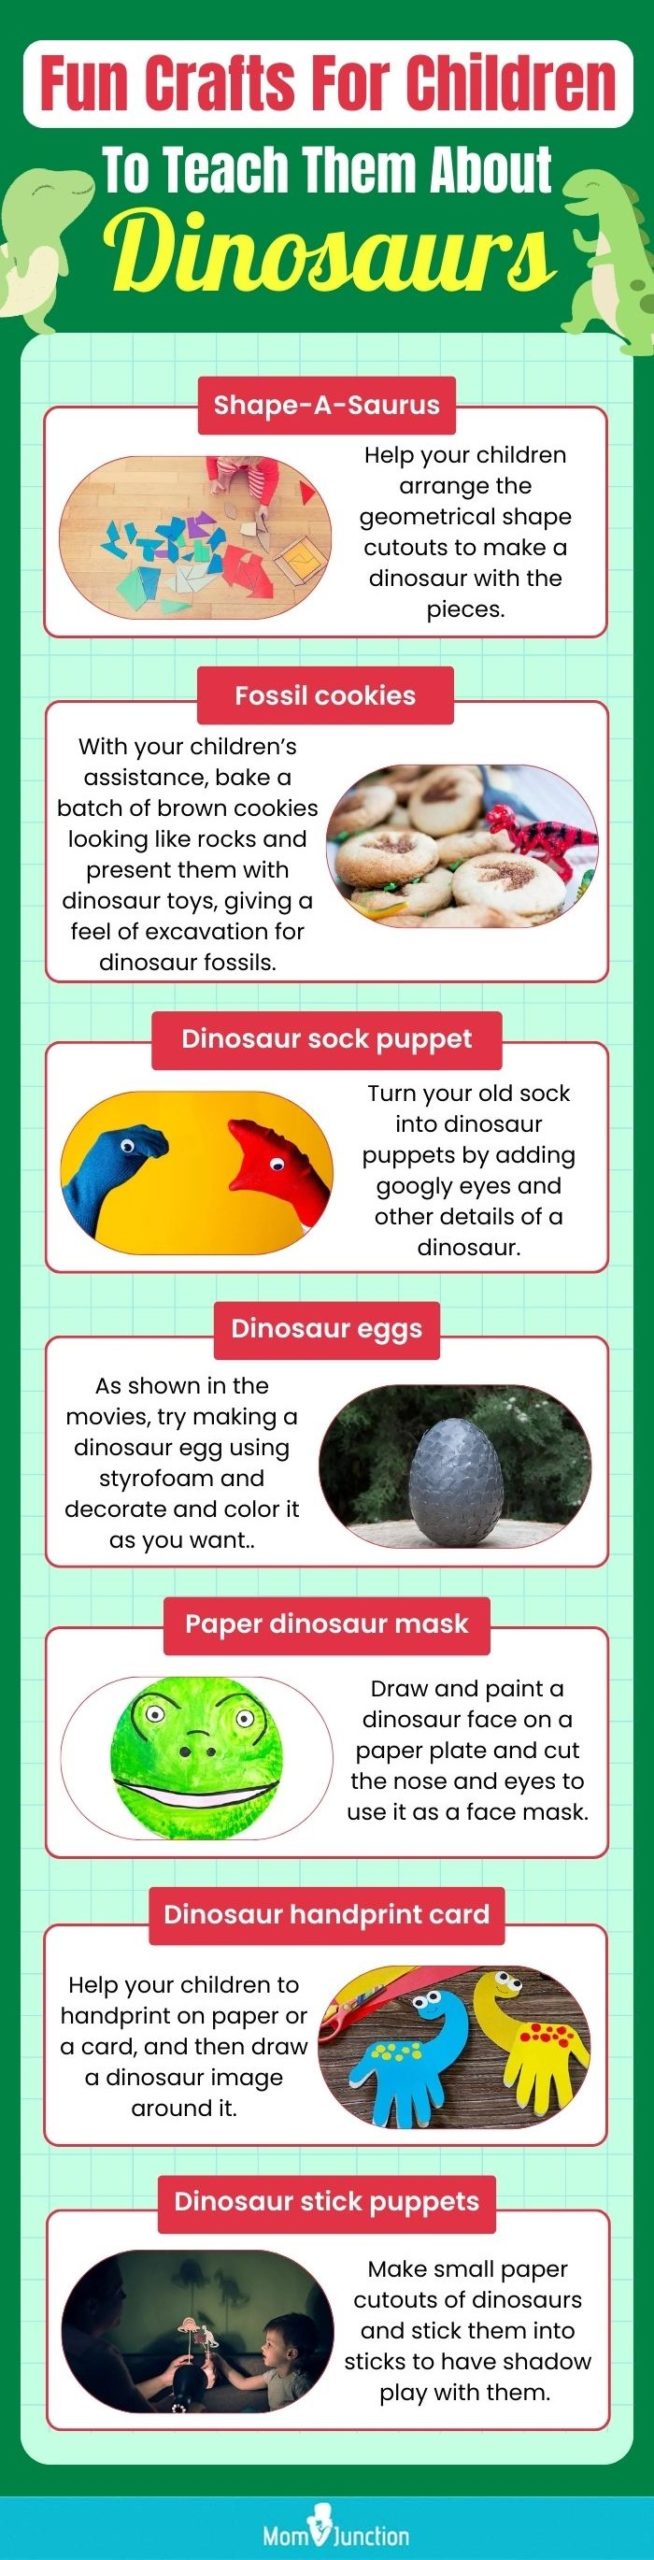 Fun Crafts For Children To Teach Them About Dinosaurs (infographic)